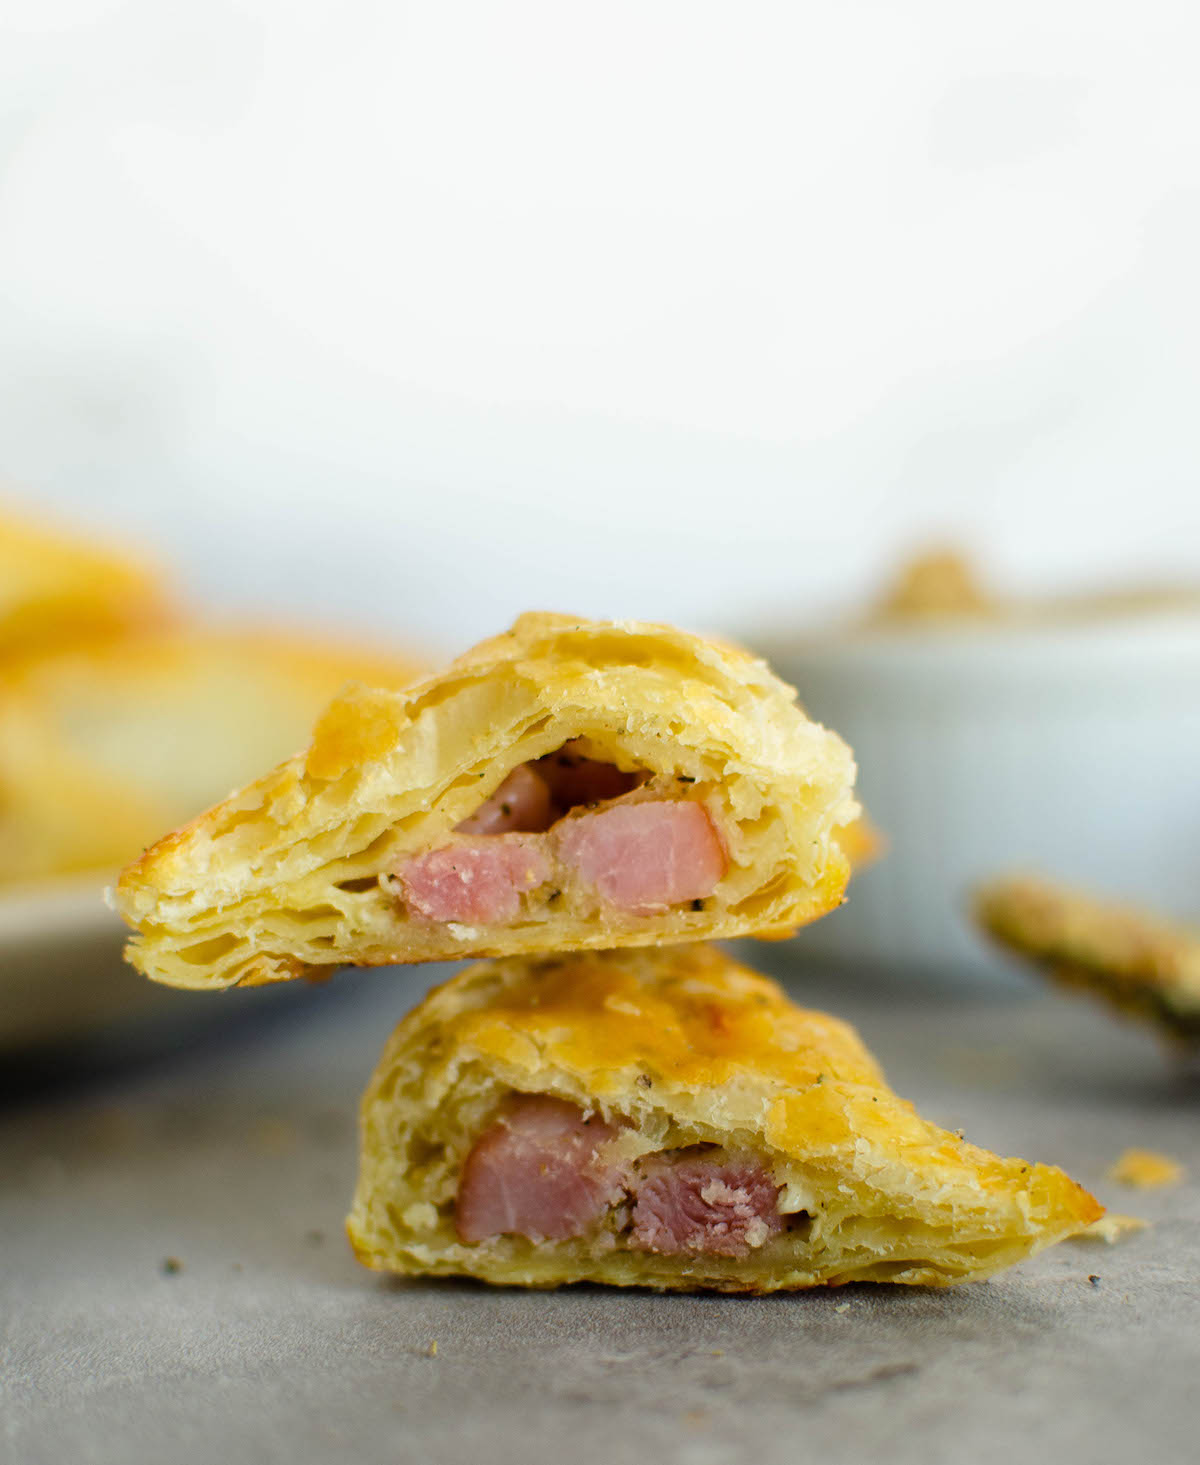 Inside ham and cheese turnovers